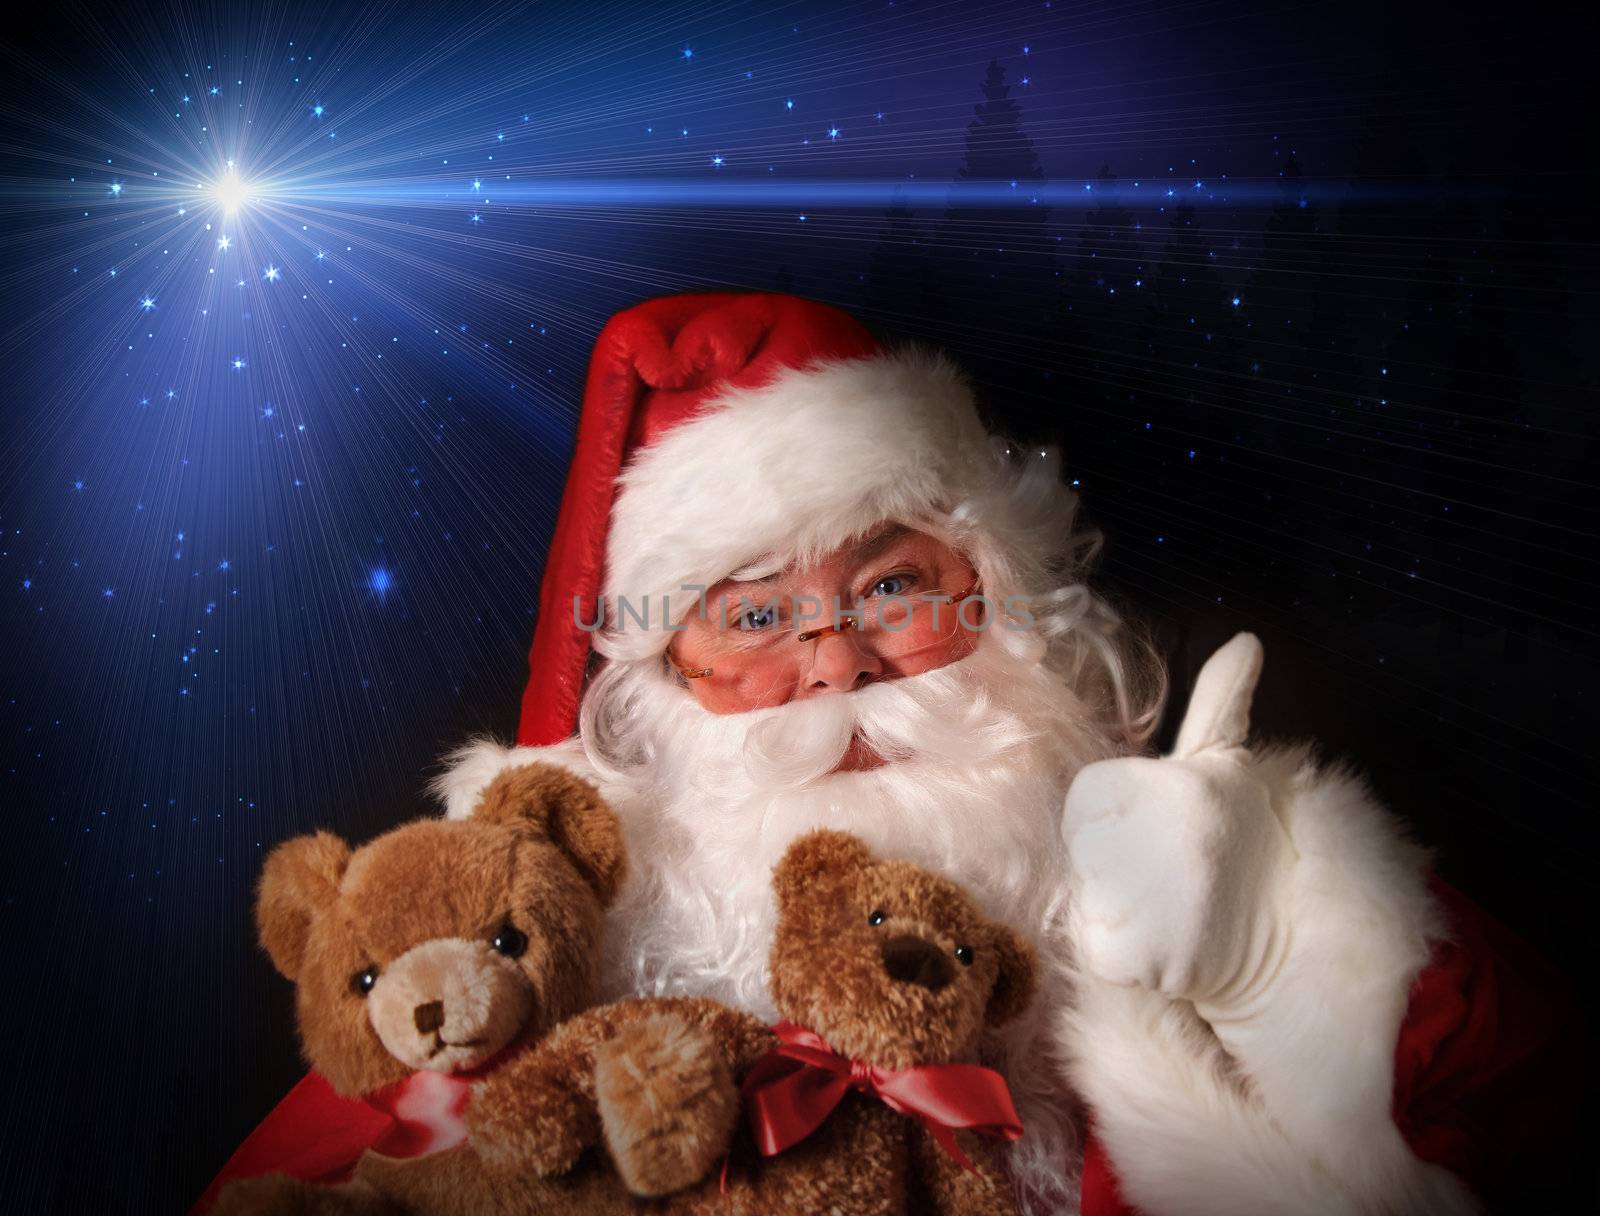 Santa smiling holding toy teddy bears by Sandralise